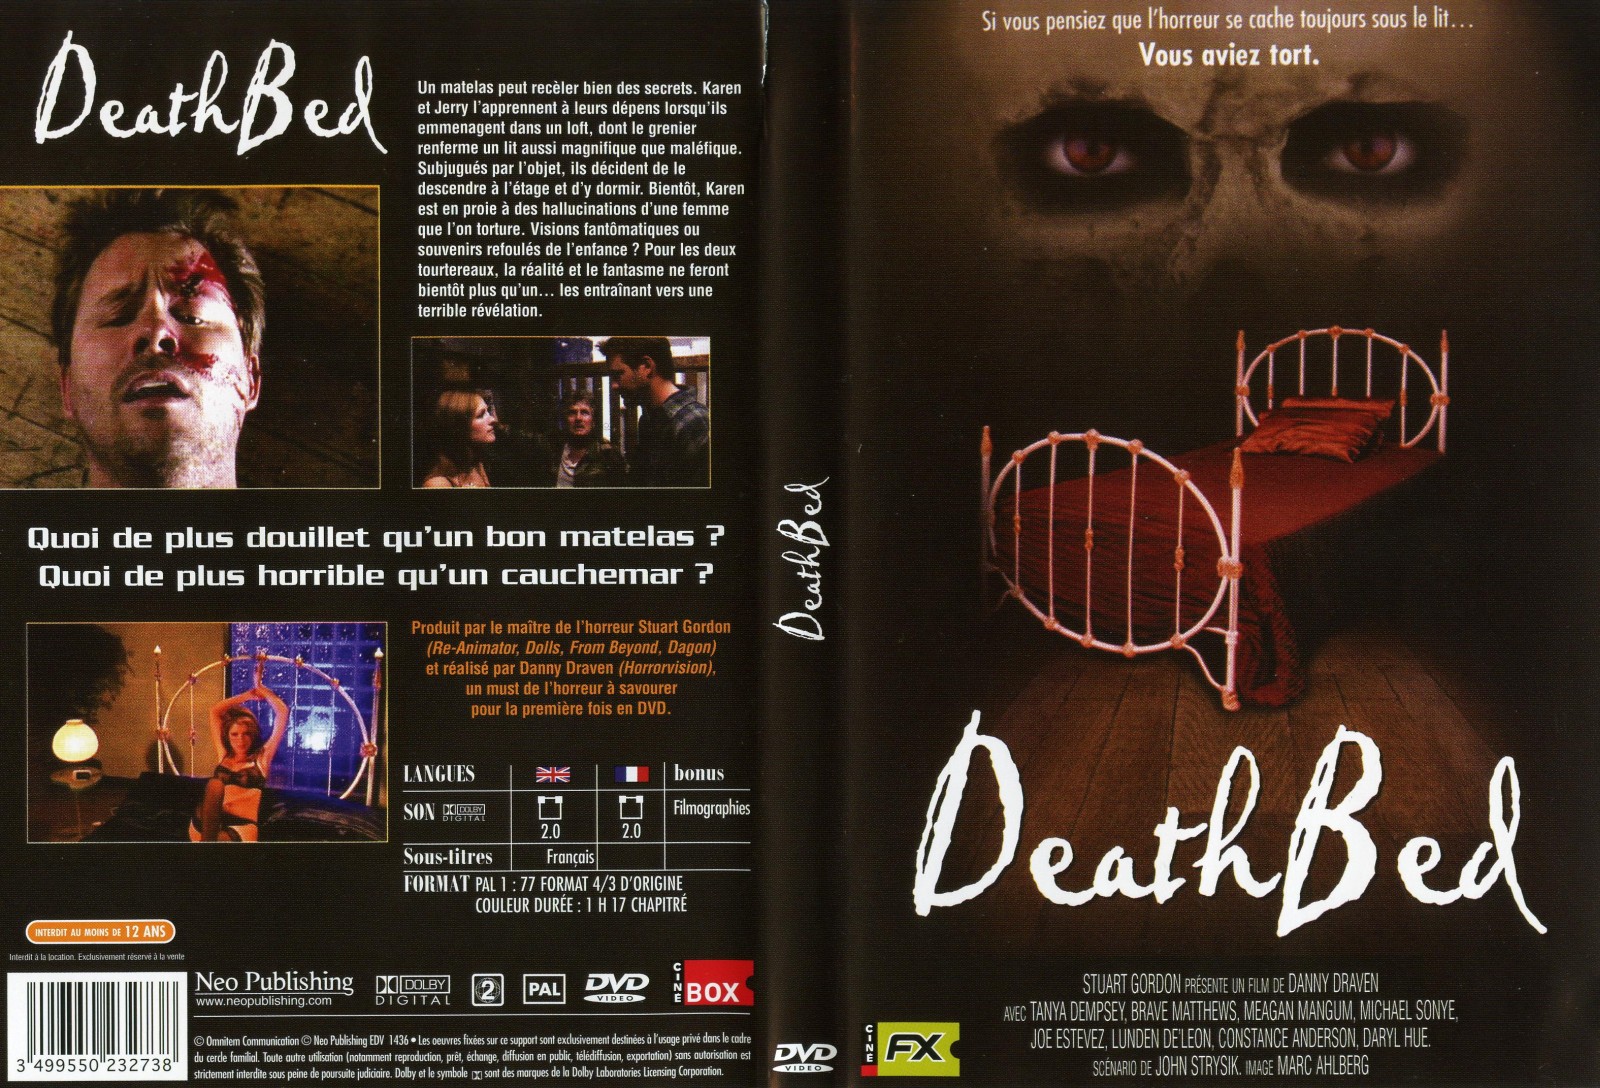 Jaquette DVD Deathbed